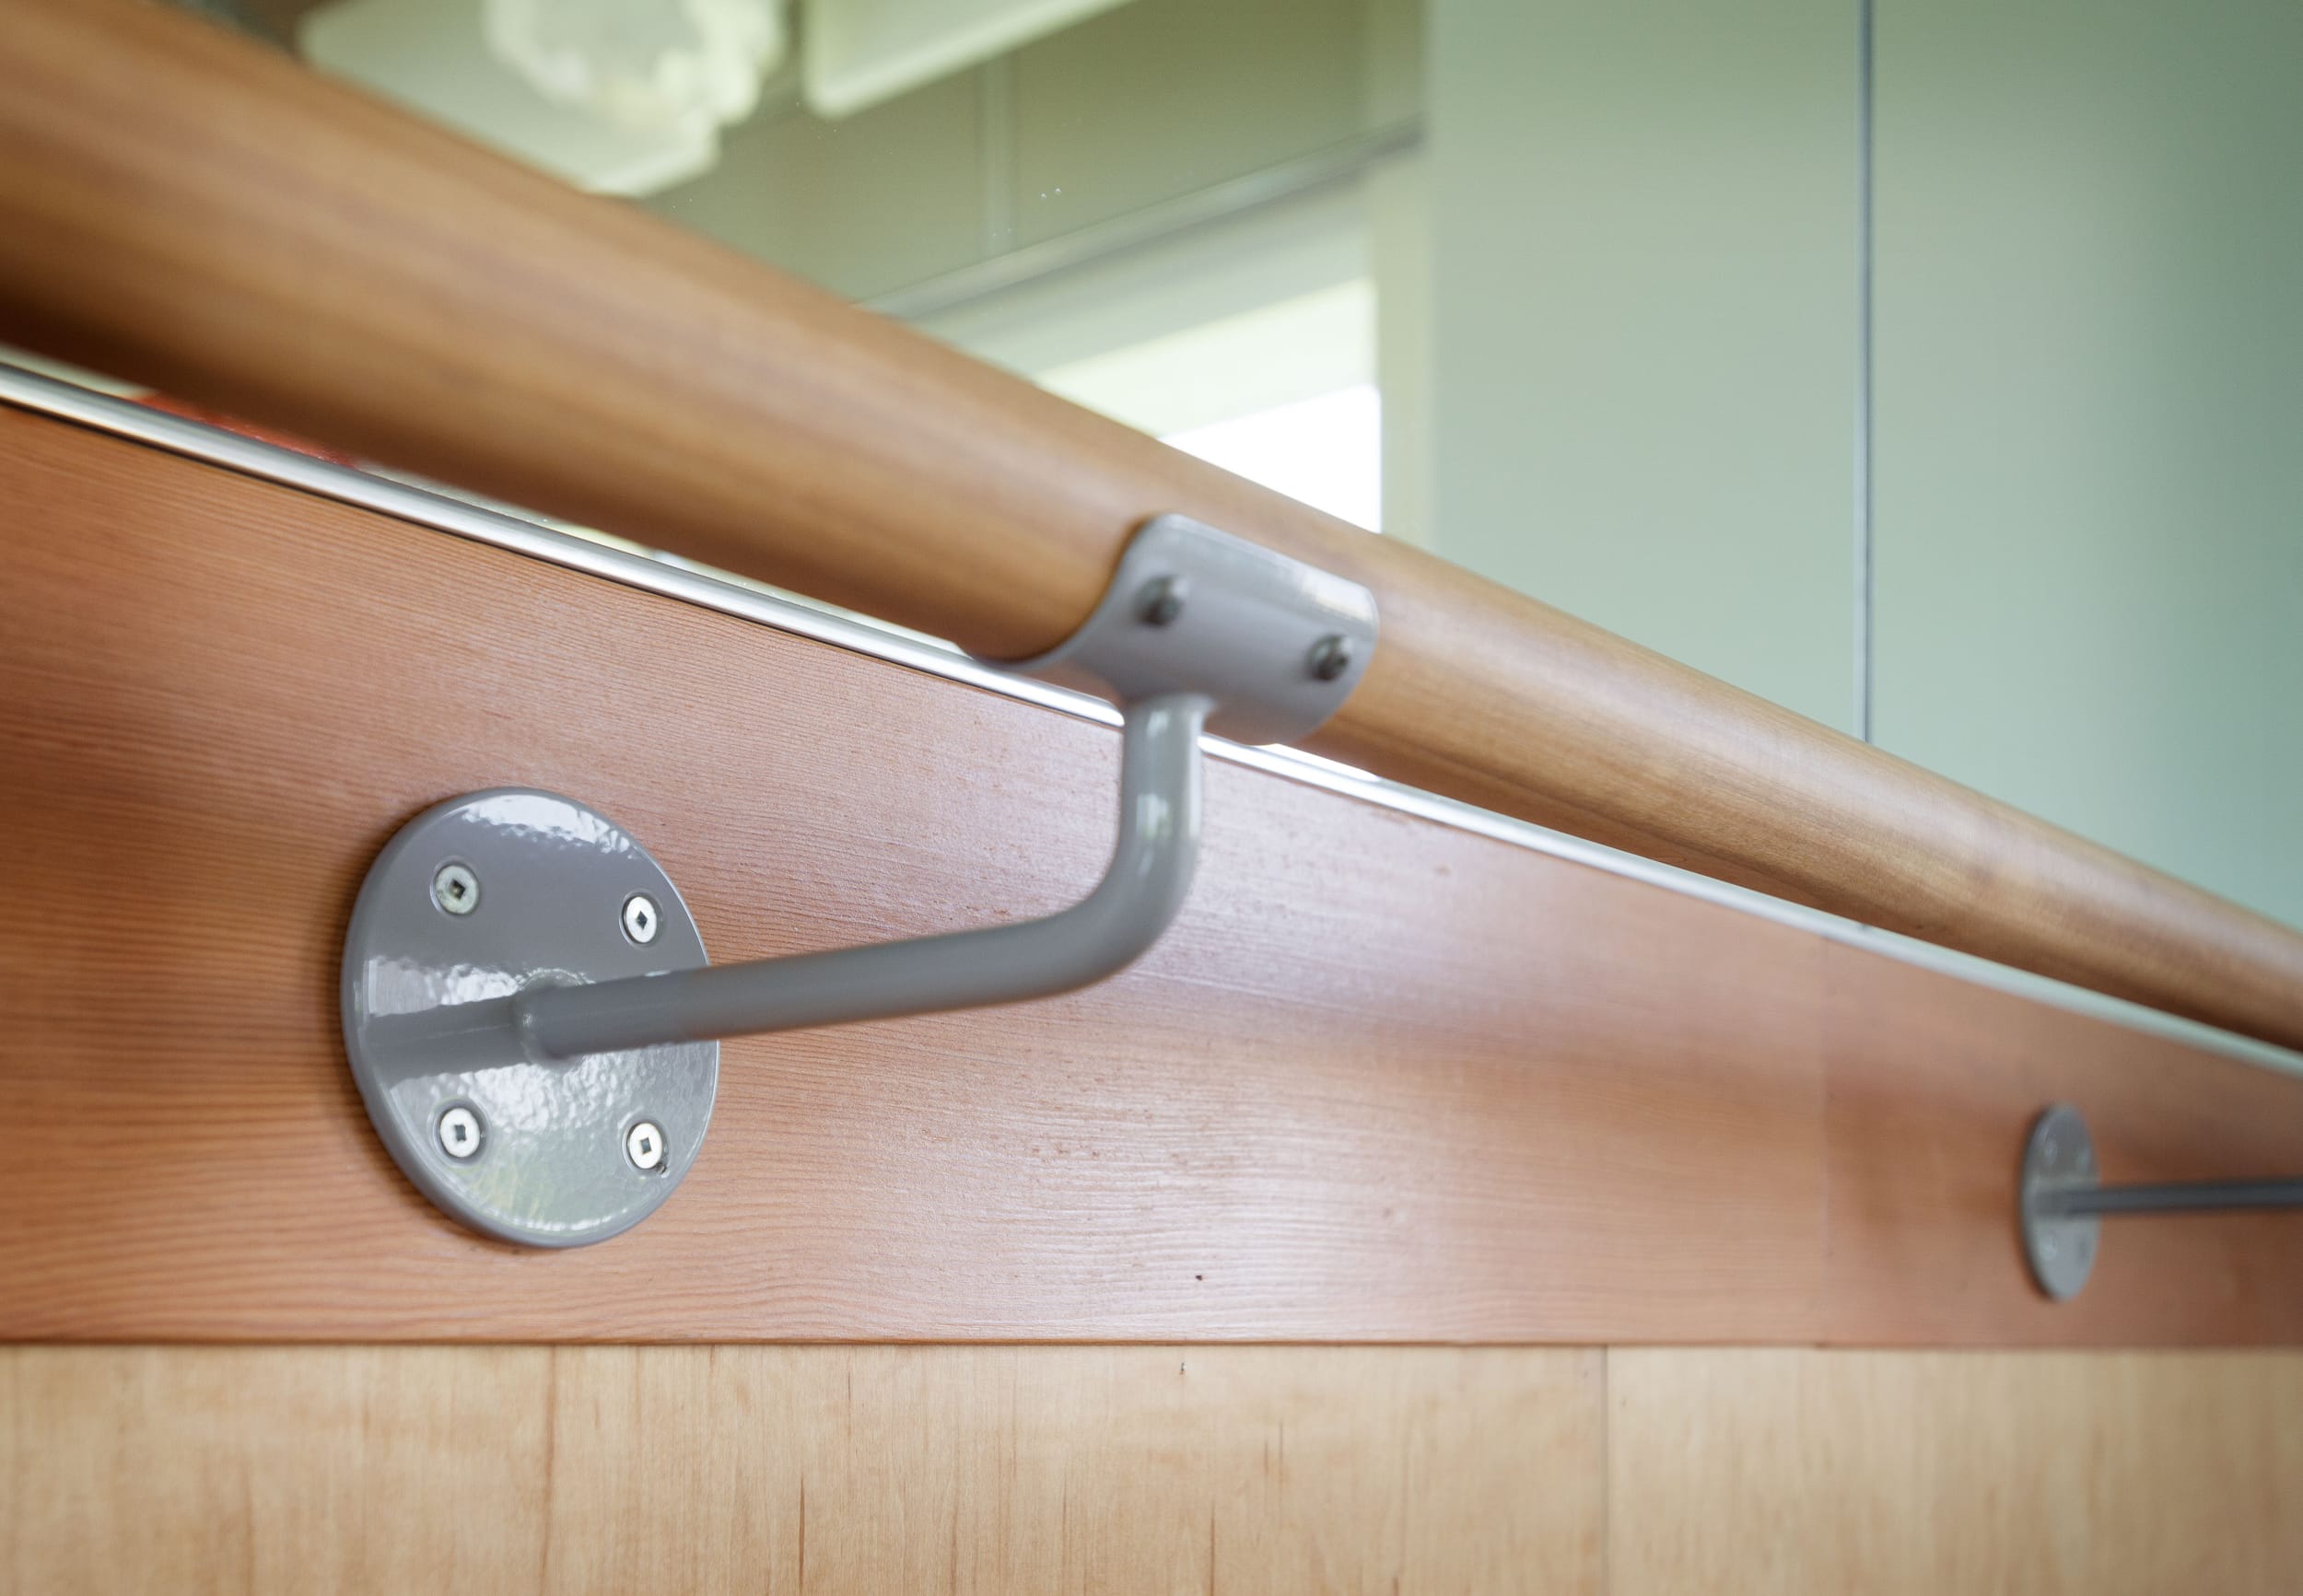 A wooden railing with metal handles on it.